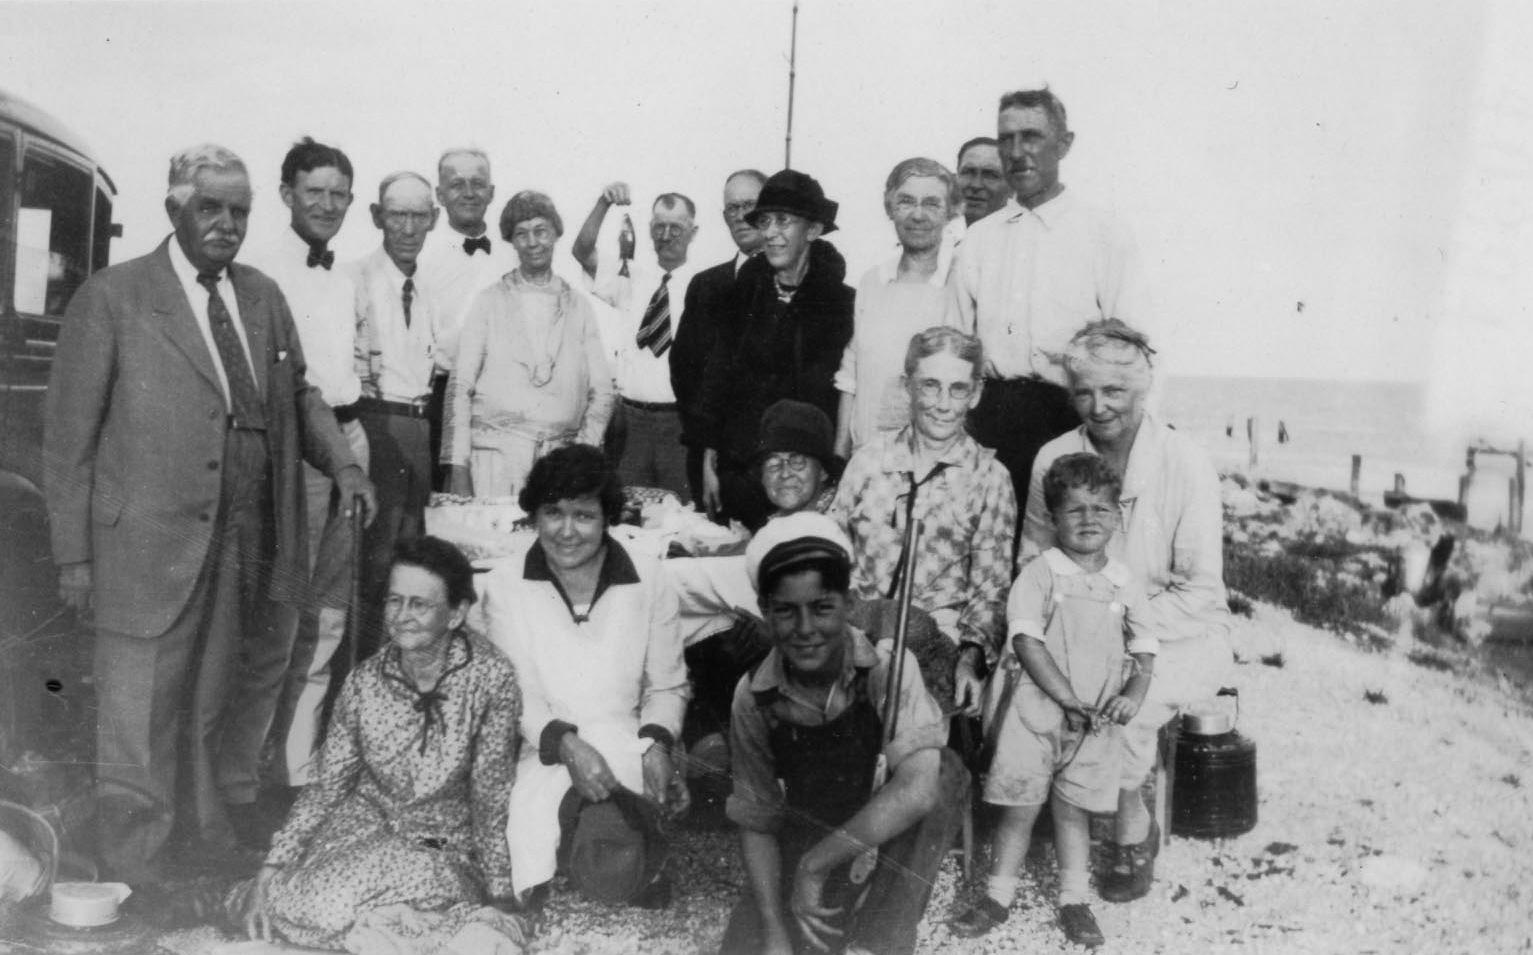 Party at the Beach - Florida City (9 mi west); right side: Walter Ashley Fred with grandparents Nellie Montgomery Fred & Walter Barnes Fred (Senior)